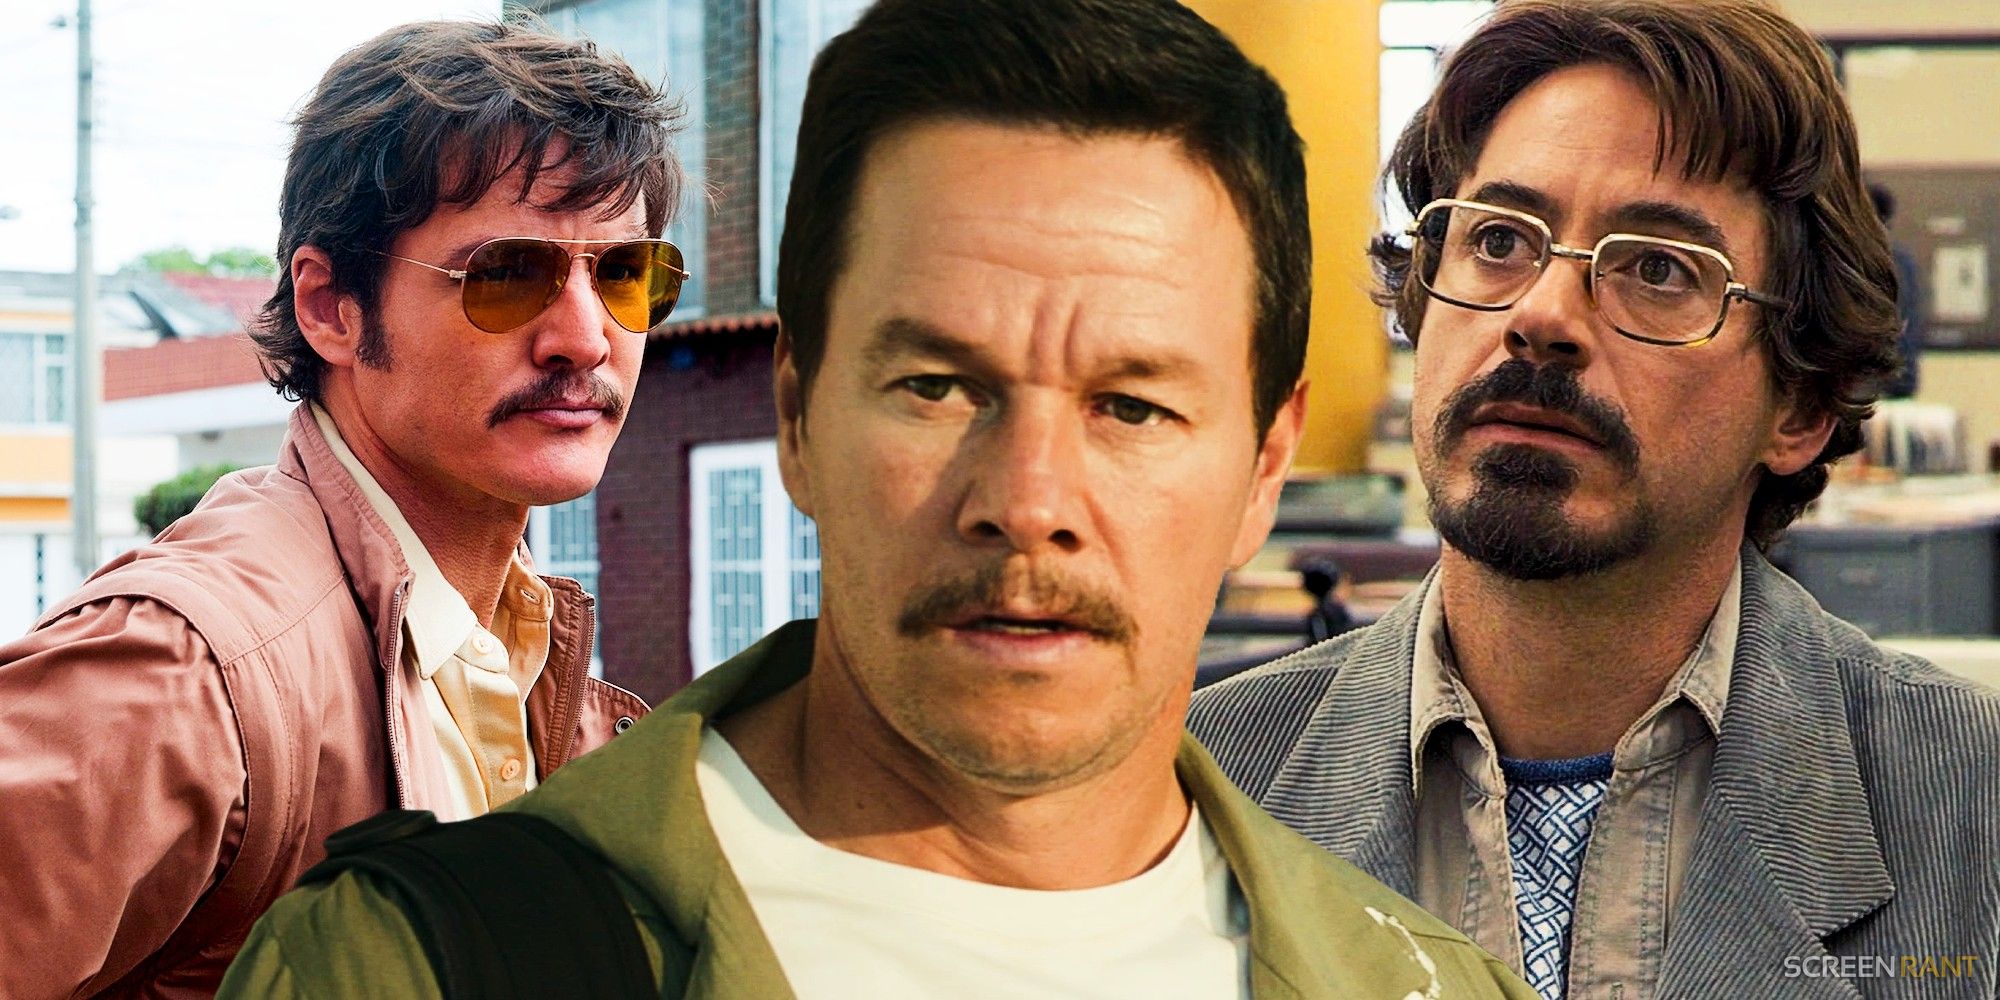 Mark Walhberg Talks Uncharted 2 Movie And Sully's Mustache - GameSpot